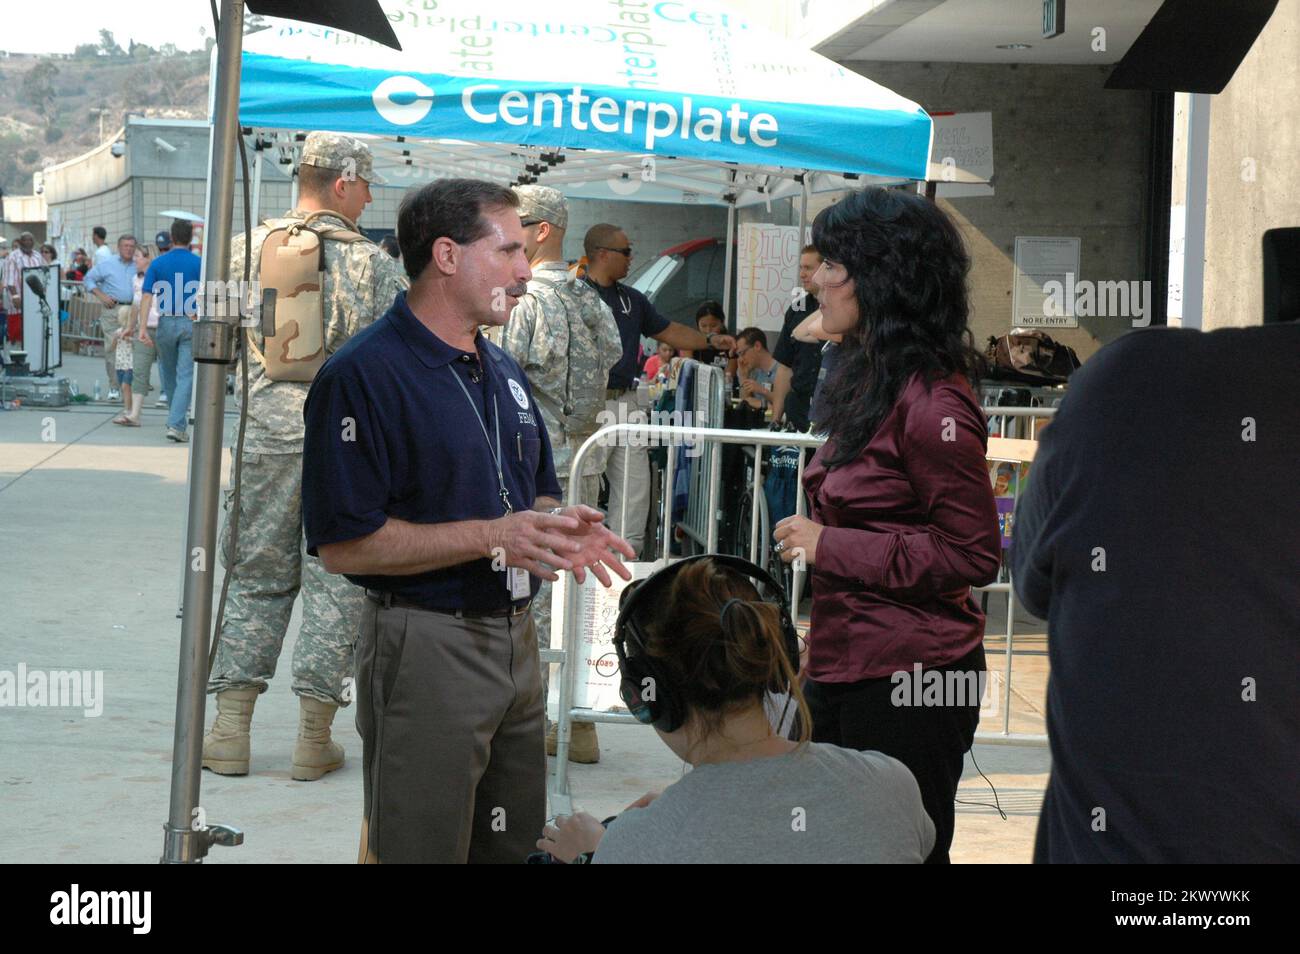 Wildfires,  San Diego, California, October 24, 2007   Lee Rosenberg, Task Force Leader at Qualcomm Stadium, explains FEMA programs to CNN reporter Thelma Gutierrez. The Southern California wildfires, concentrated in San Diego County and the Los Angeles County mountains, generated a major disaster declaration by the President today. Michael Raphael/FEMA.. Photographs Relating to Disasters and Emergency Management Programs, Activities, and Officials Stock Photo